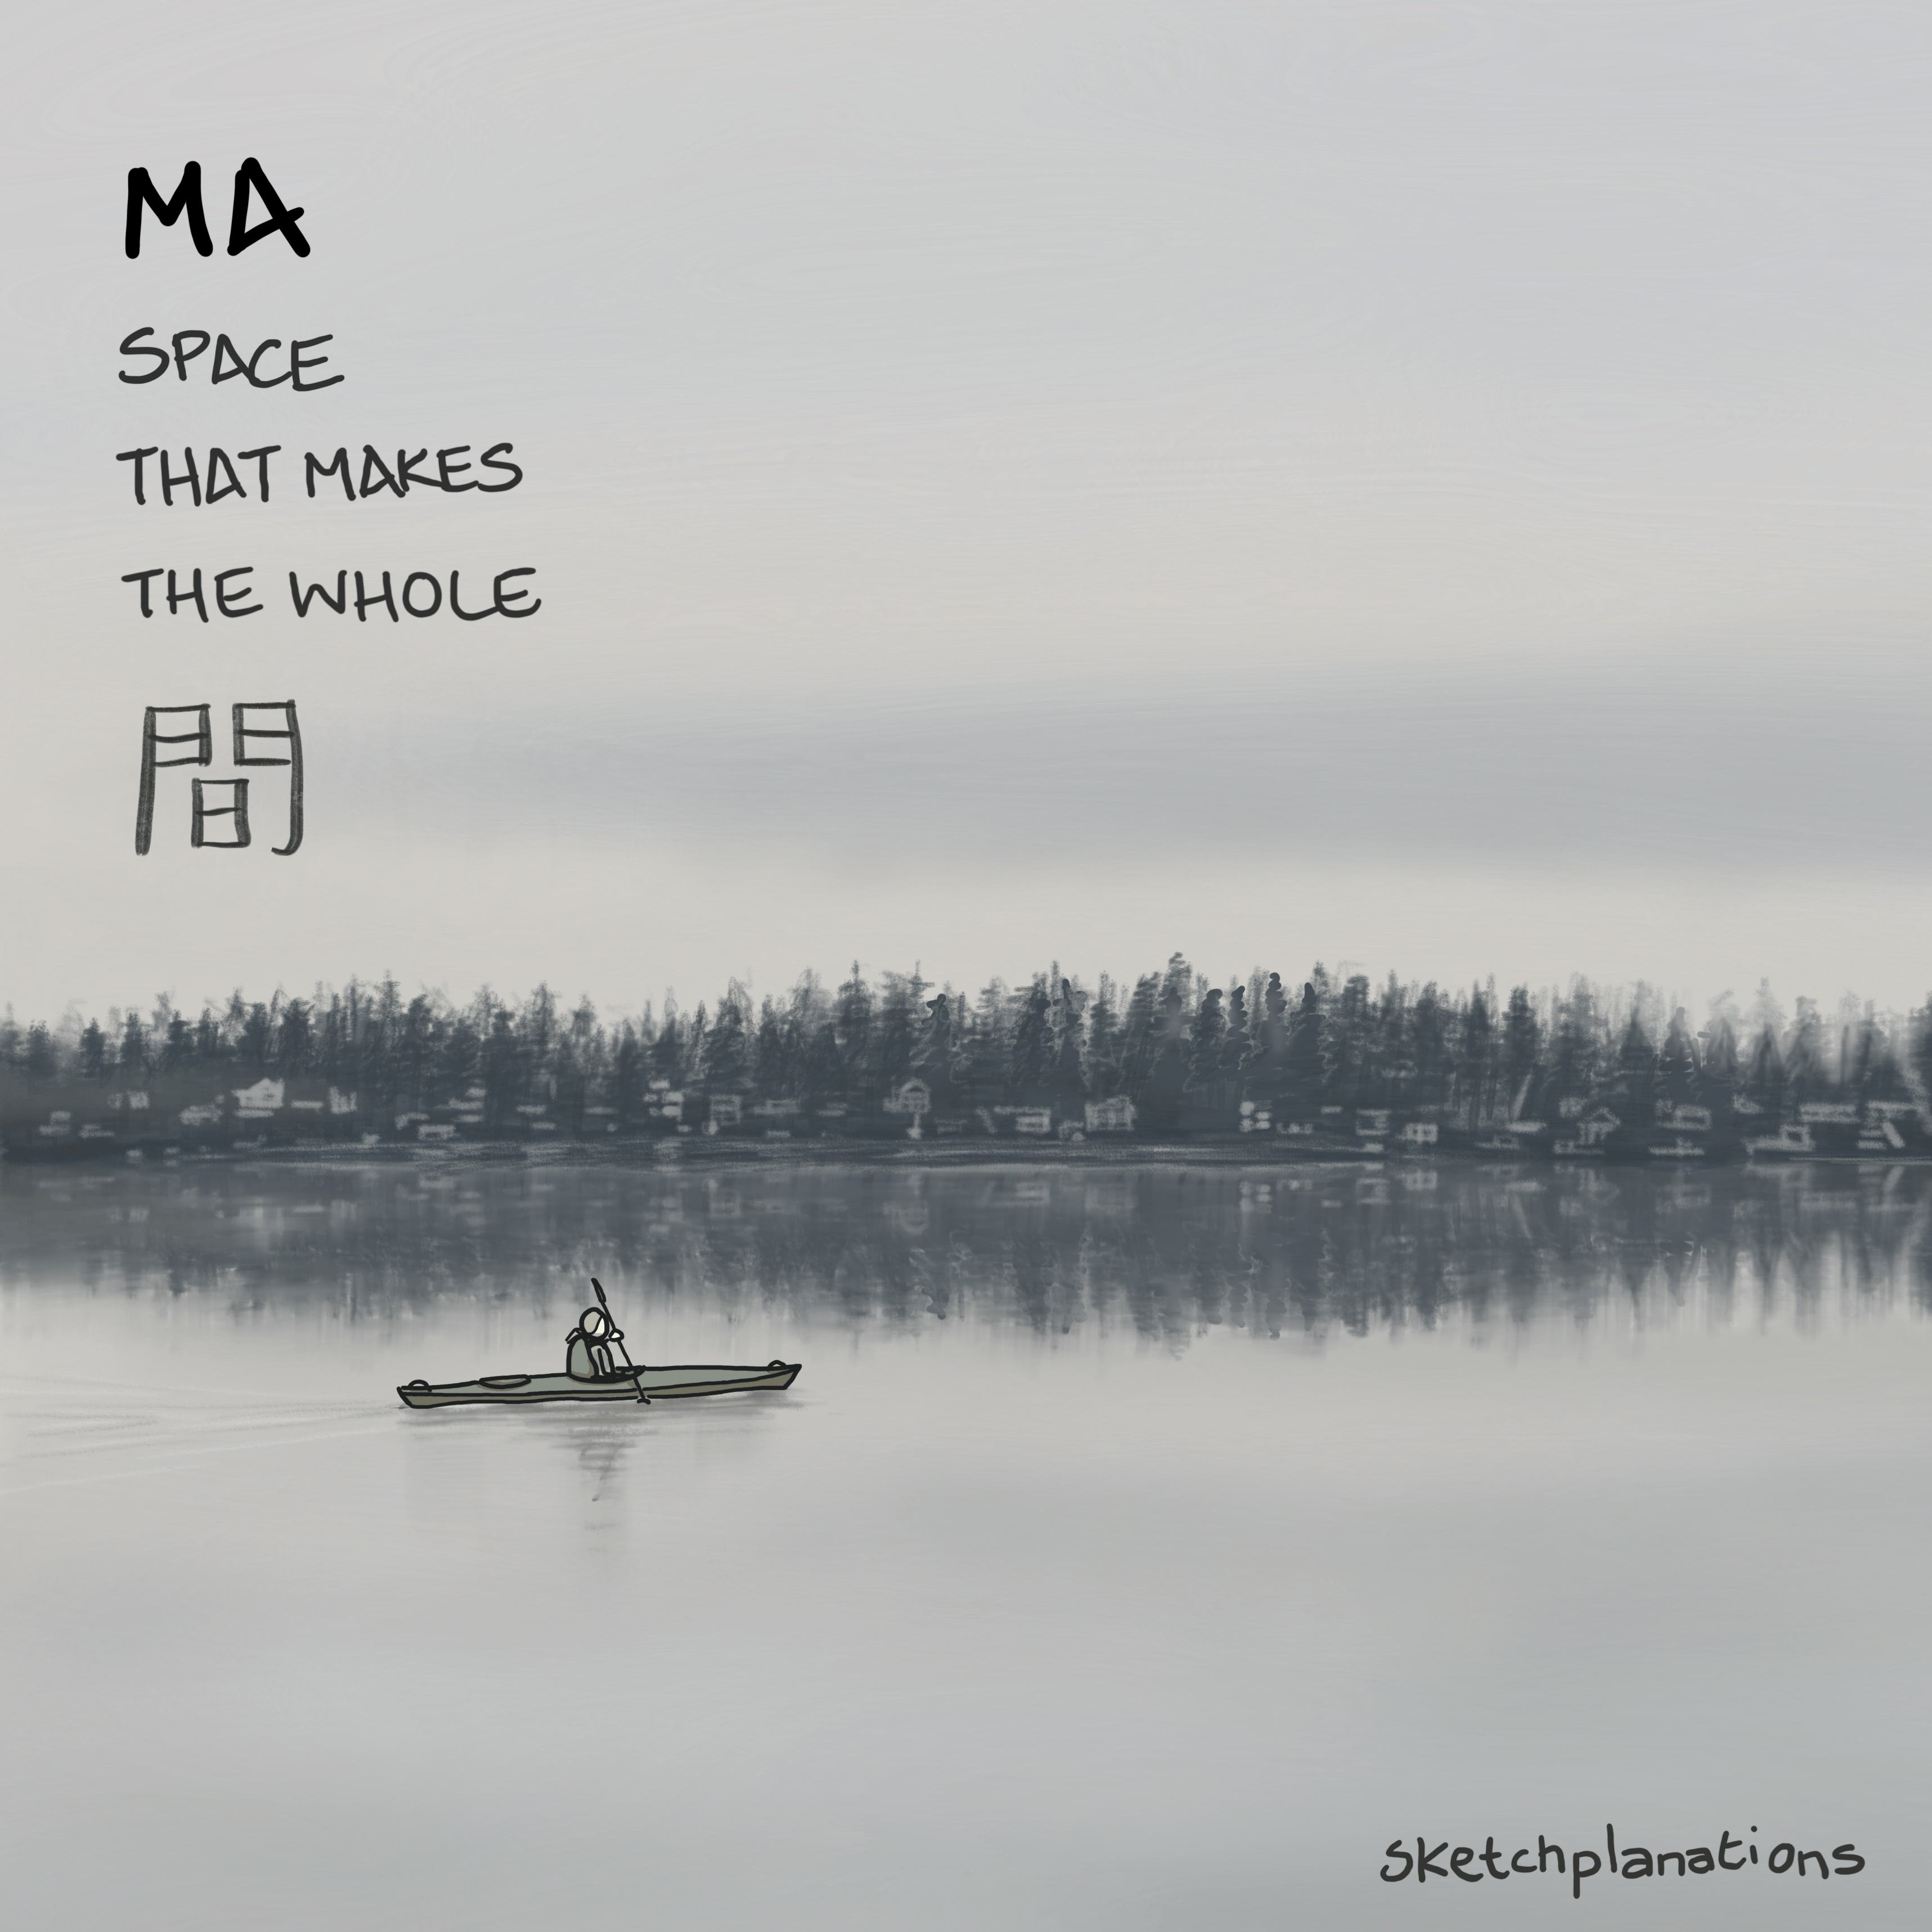 Ma sketch: a kayaker glides through a calm lake with a shoreline reflection on a moody grey day